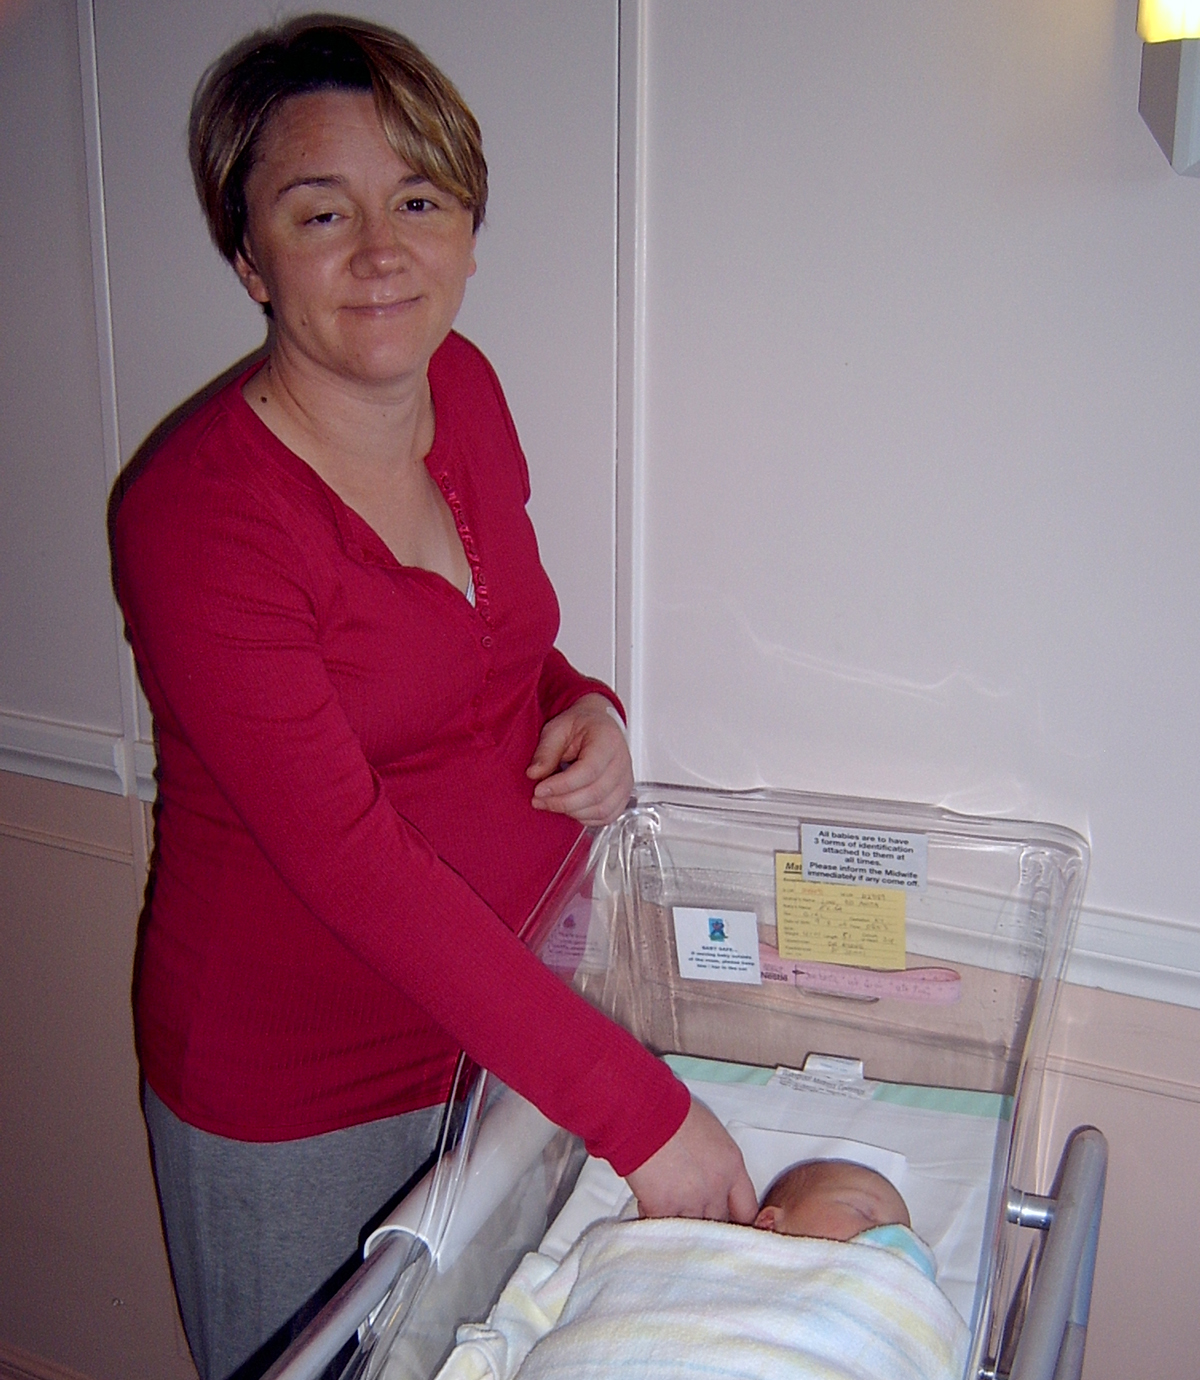 Anita in hospital, with her new baby